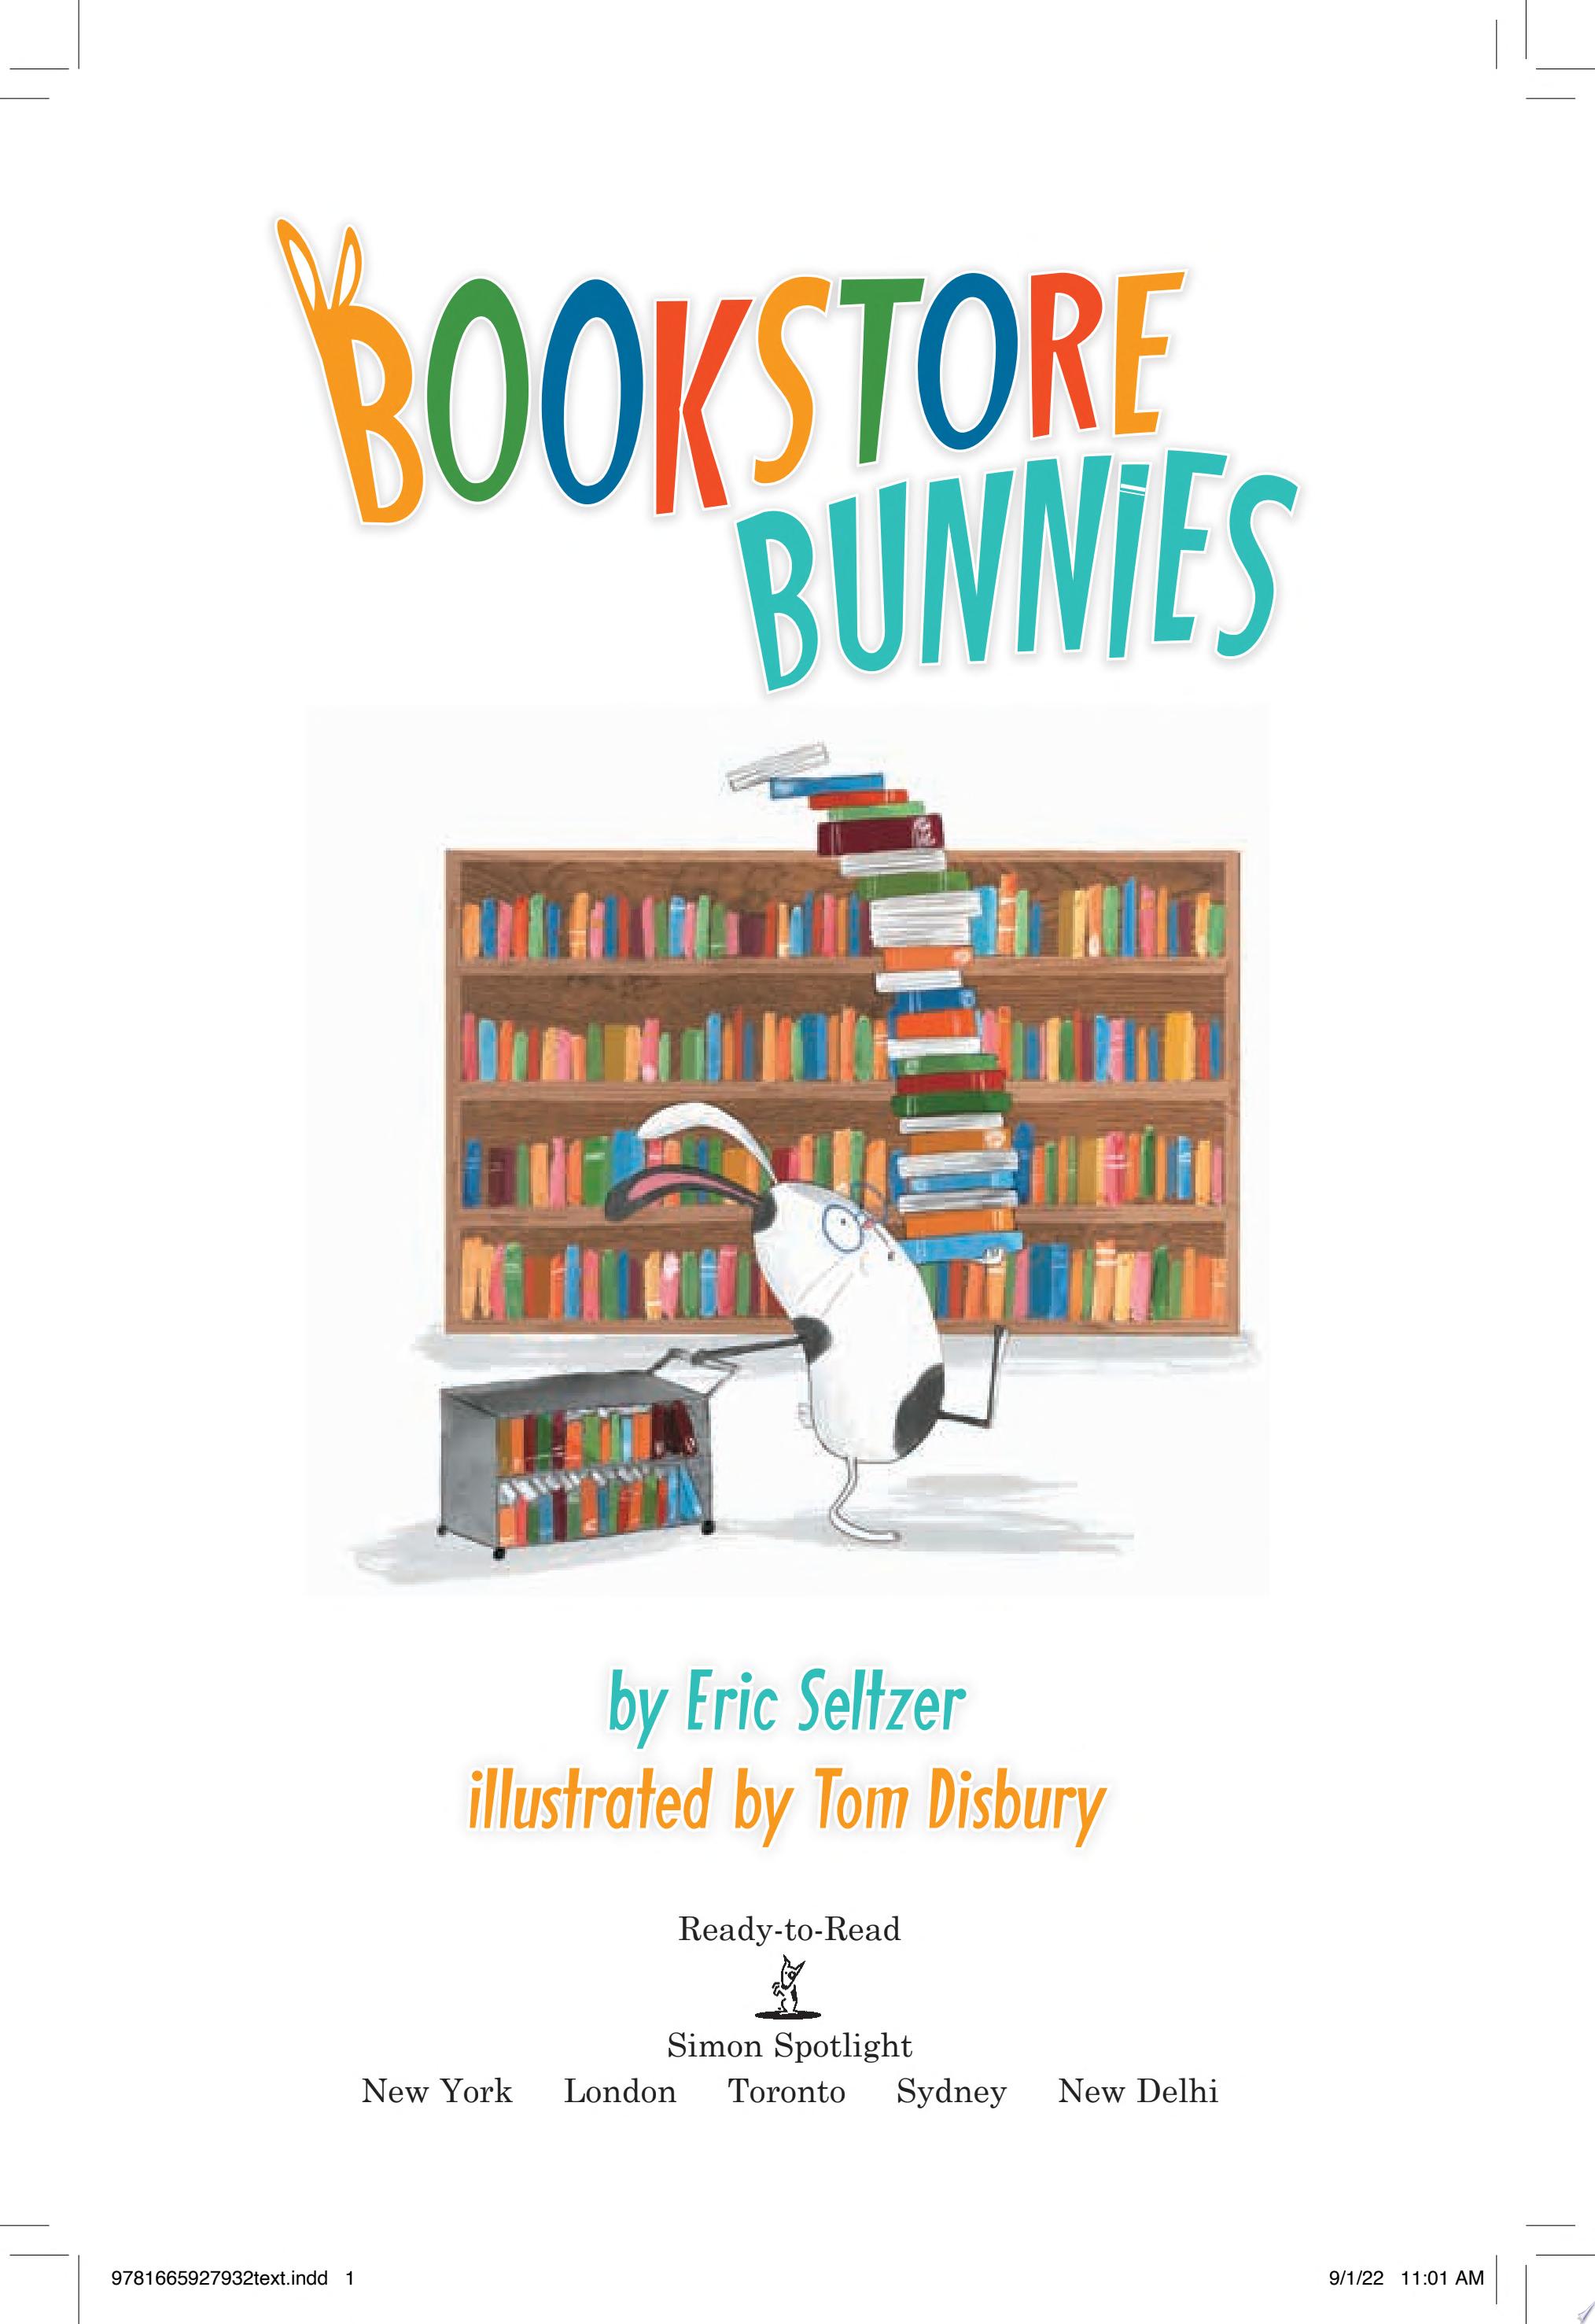 Image for "Bookstore Bunnies"